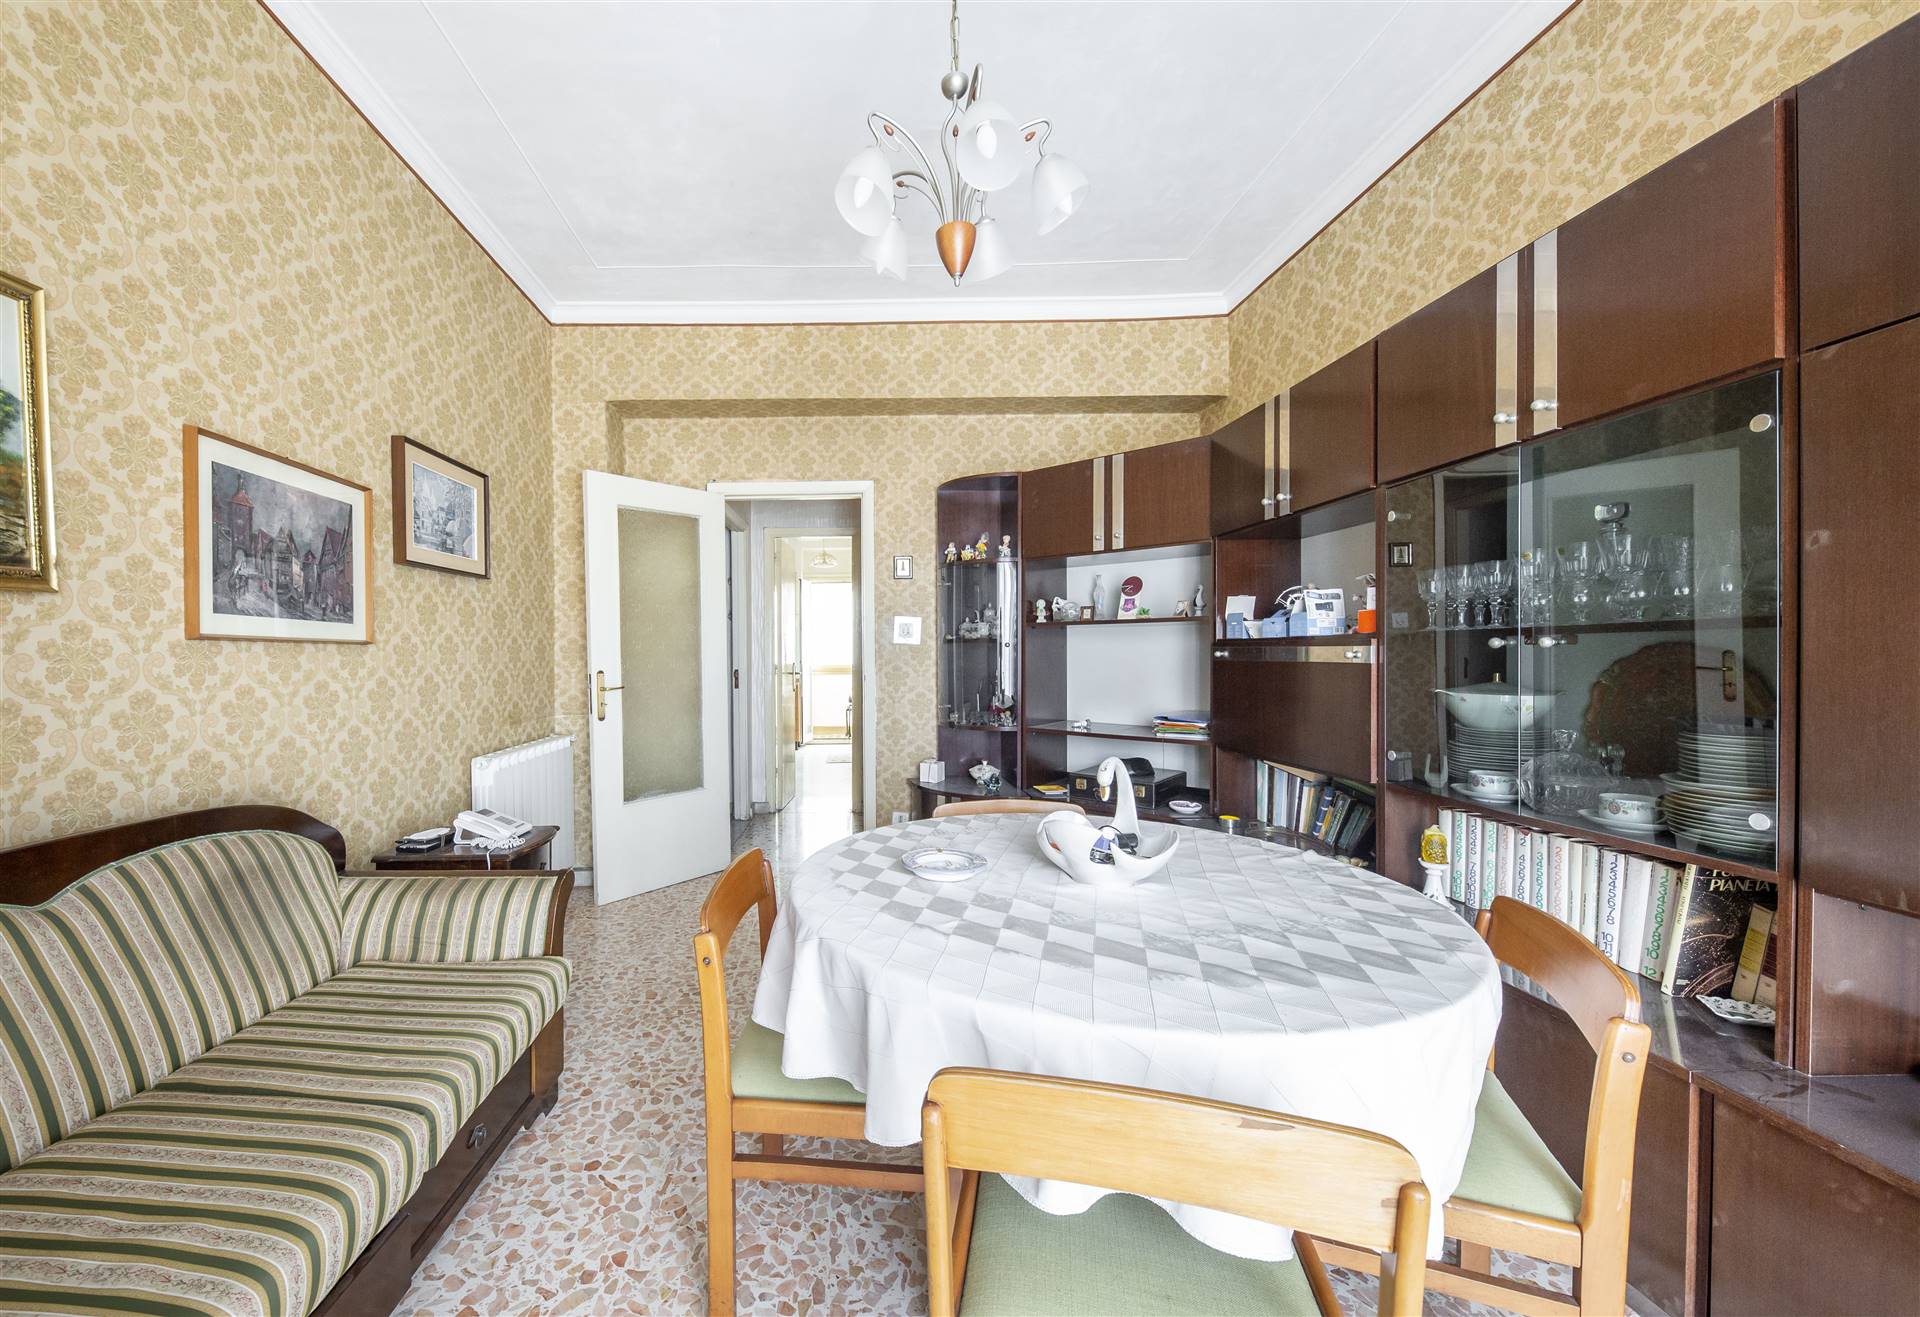 PIAZZA MONTESSORI, CATANIA, Apartment for sale of 87 Sq. mt., Habitable, Heating Individual heating system, Energetic class: C, Epi: 98,06 kwh/m2 